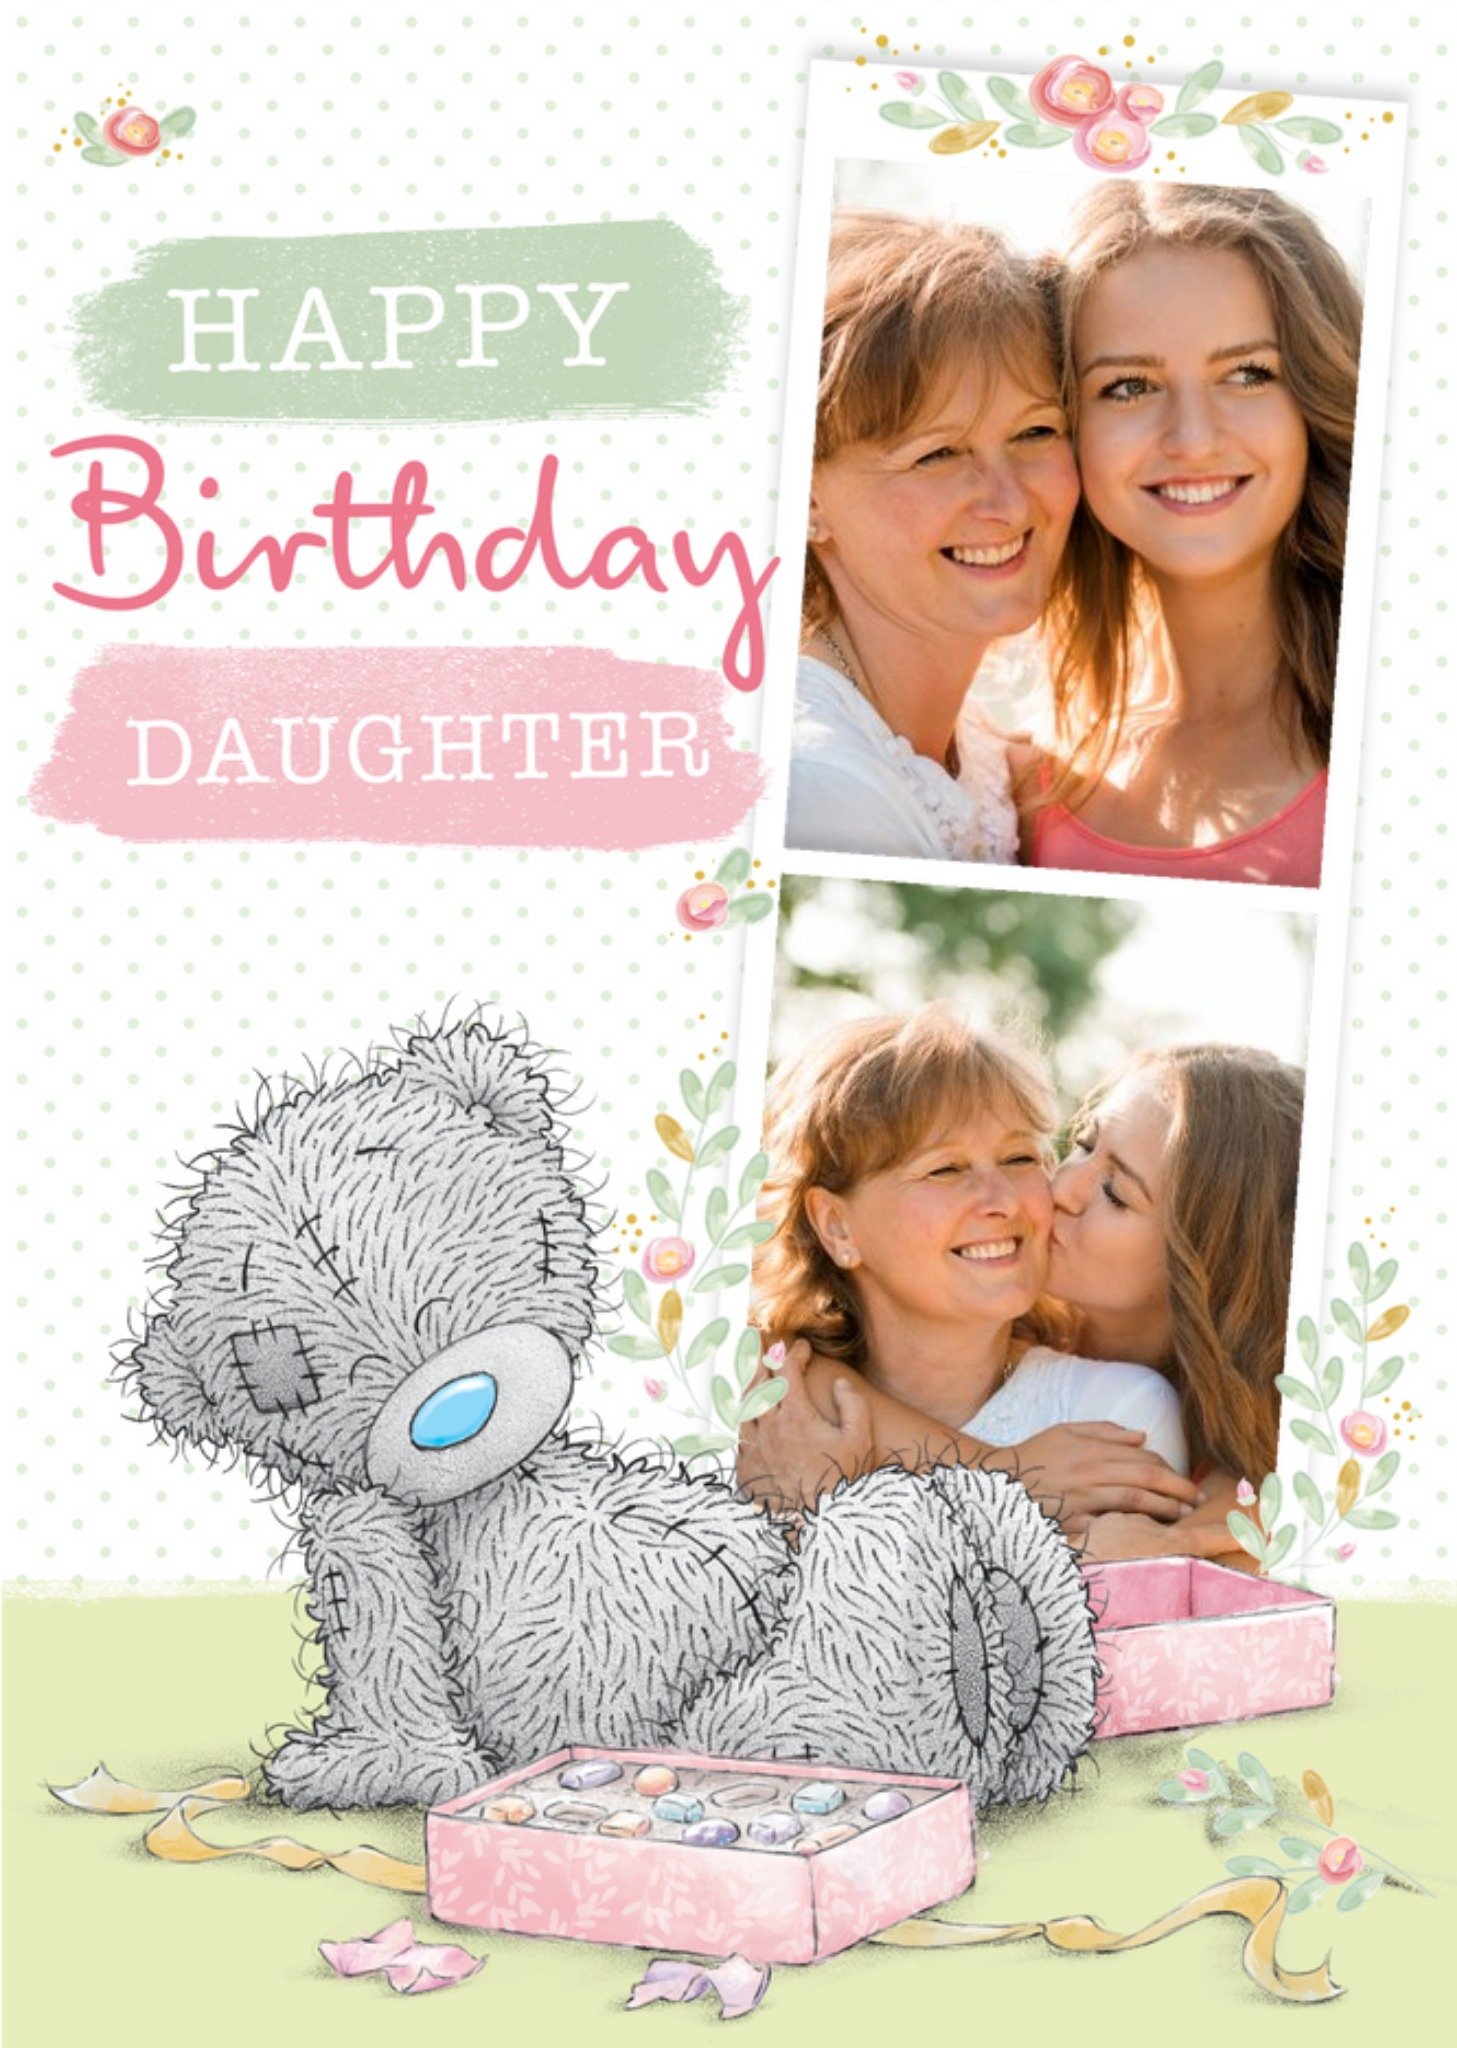 Me To You Daughter Birthday Card - Tatty Teddy - Photo Upload Card, Large